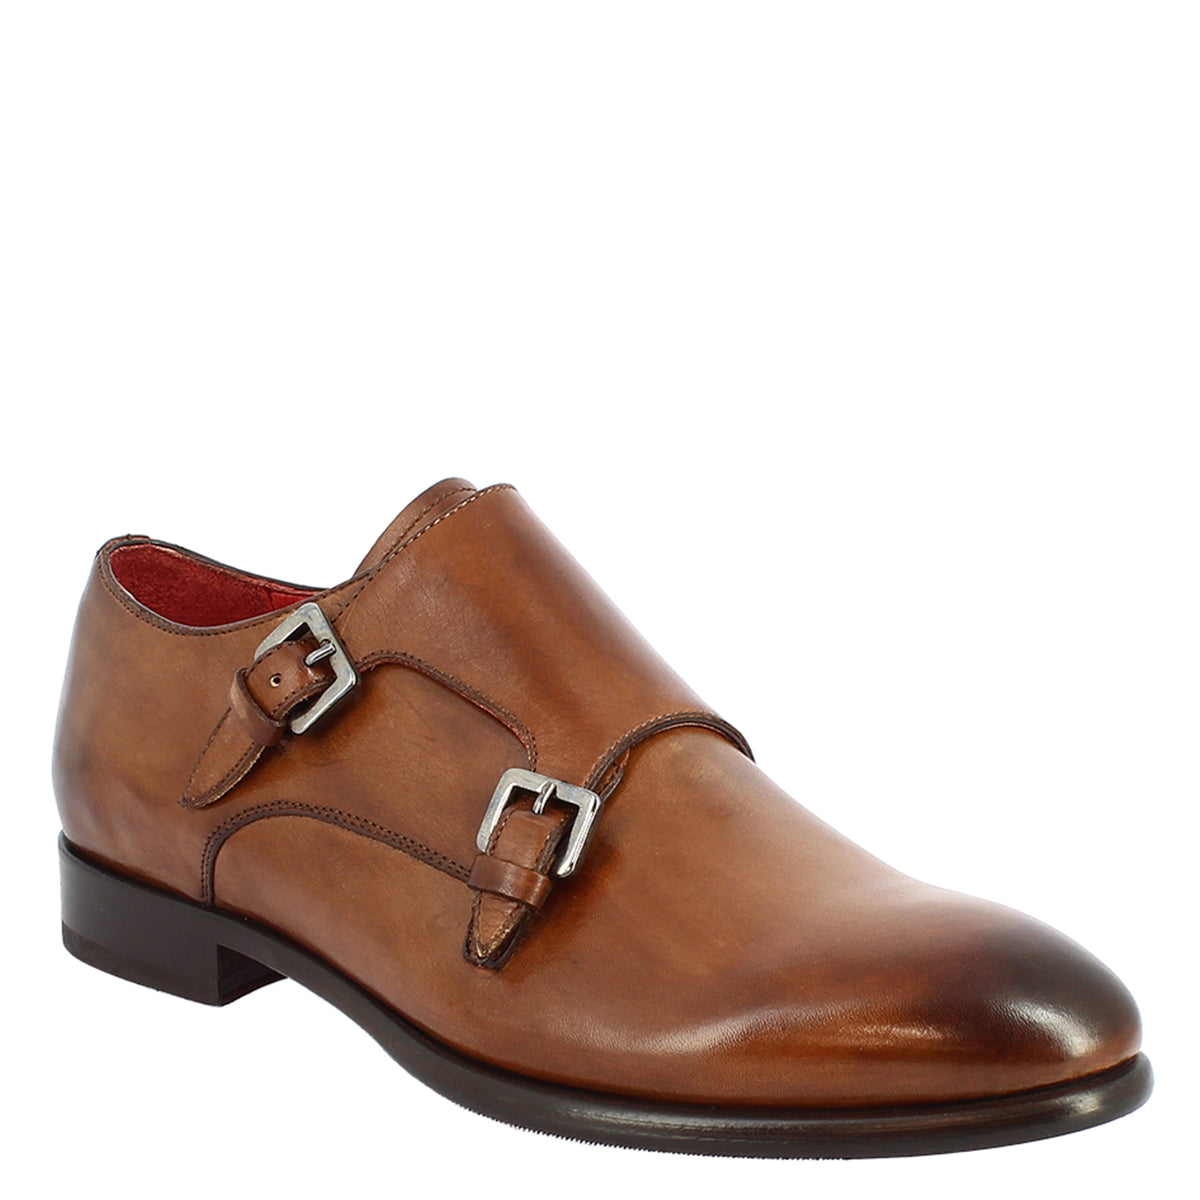 Men's double buckle shoes in brandy leather handmade